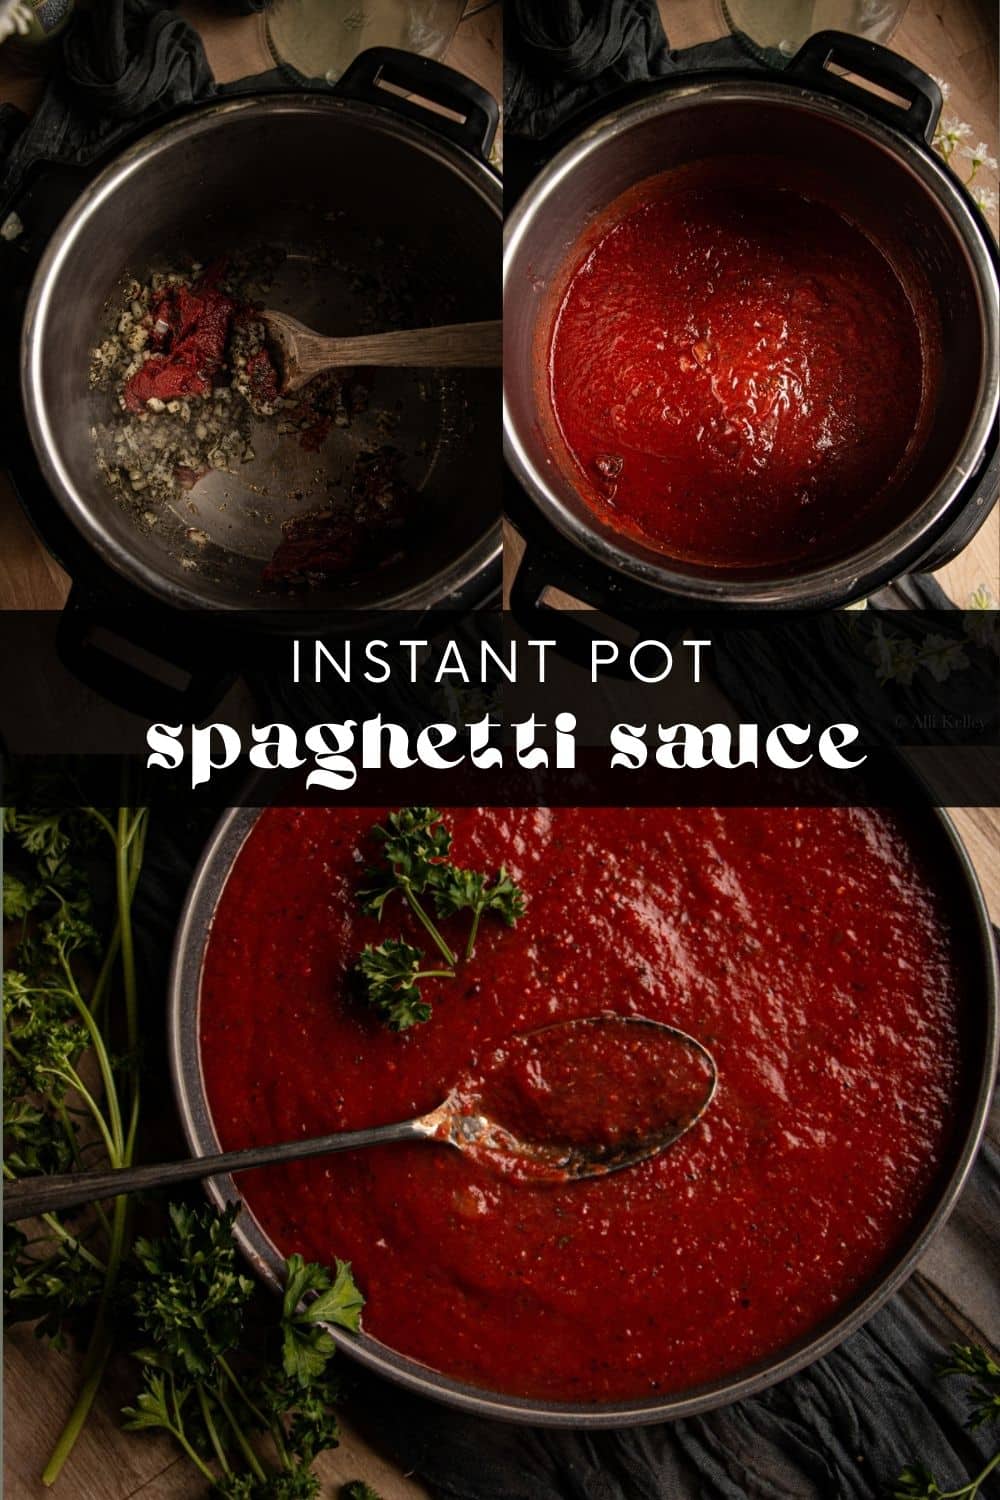 When looking for a quick and delicious dinner, this Instant Pot marinara is the perfect option! My Instant Pot tomato sauce recipe is an absolute classic - it has all the flavor of a slow-simmered sauce but takes minutes to make. Full of tangy tomatoes, onions, and herbs, this sauce is ideal for pasta dishes or as a dipping sauce.